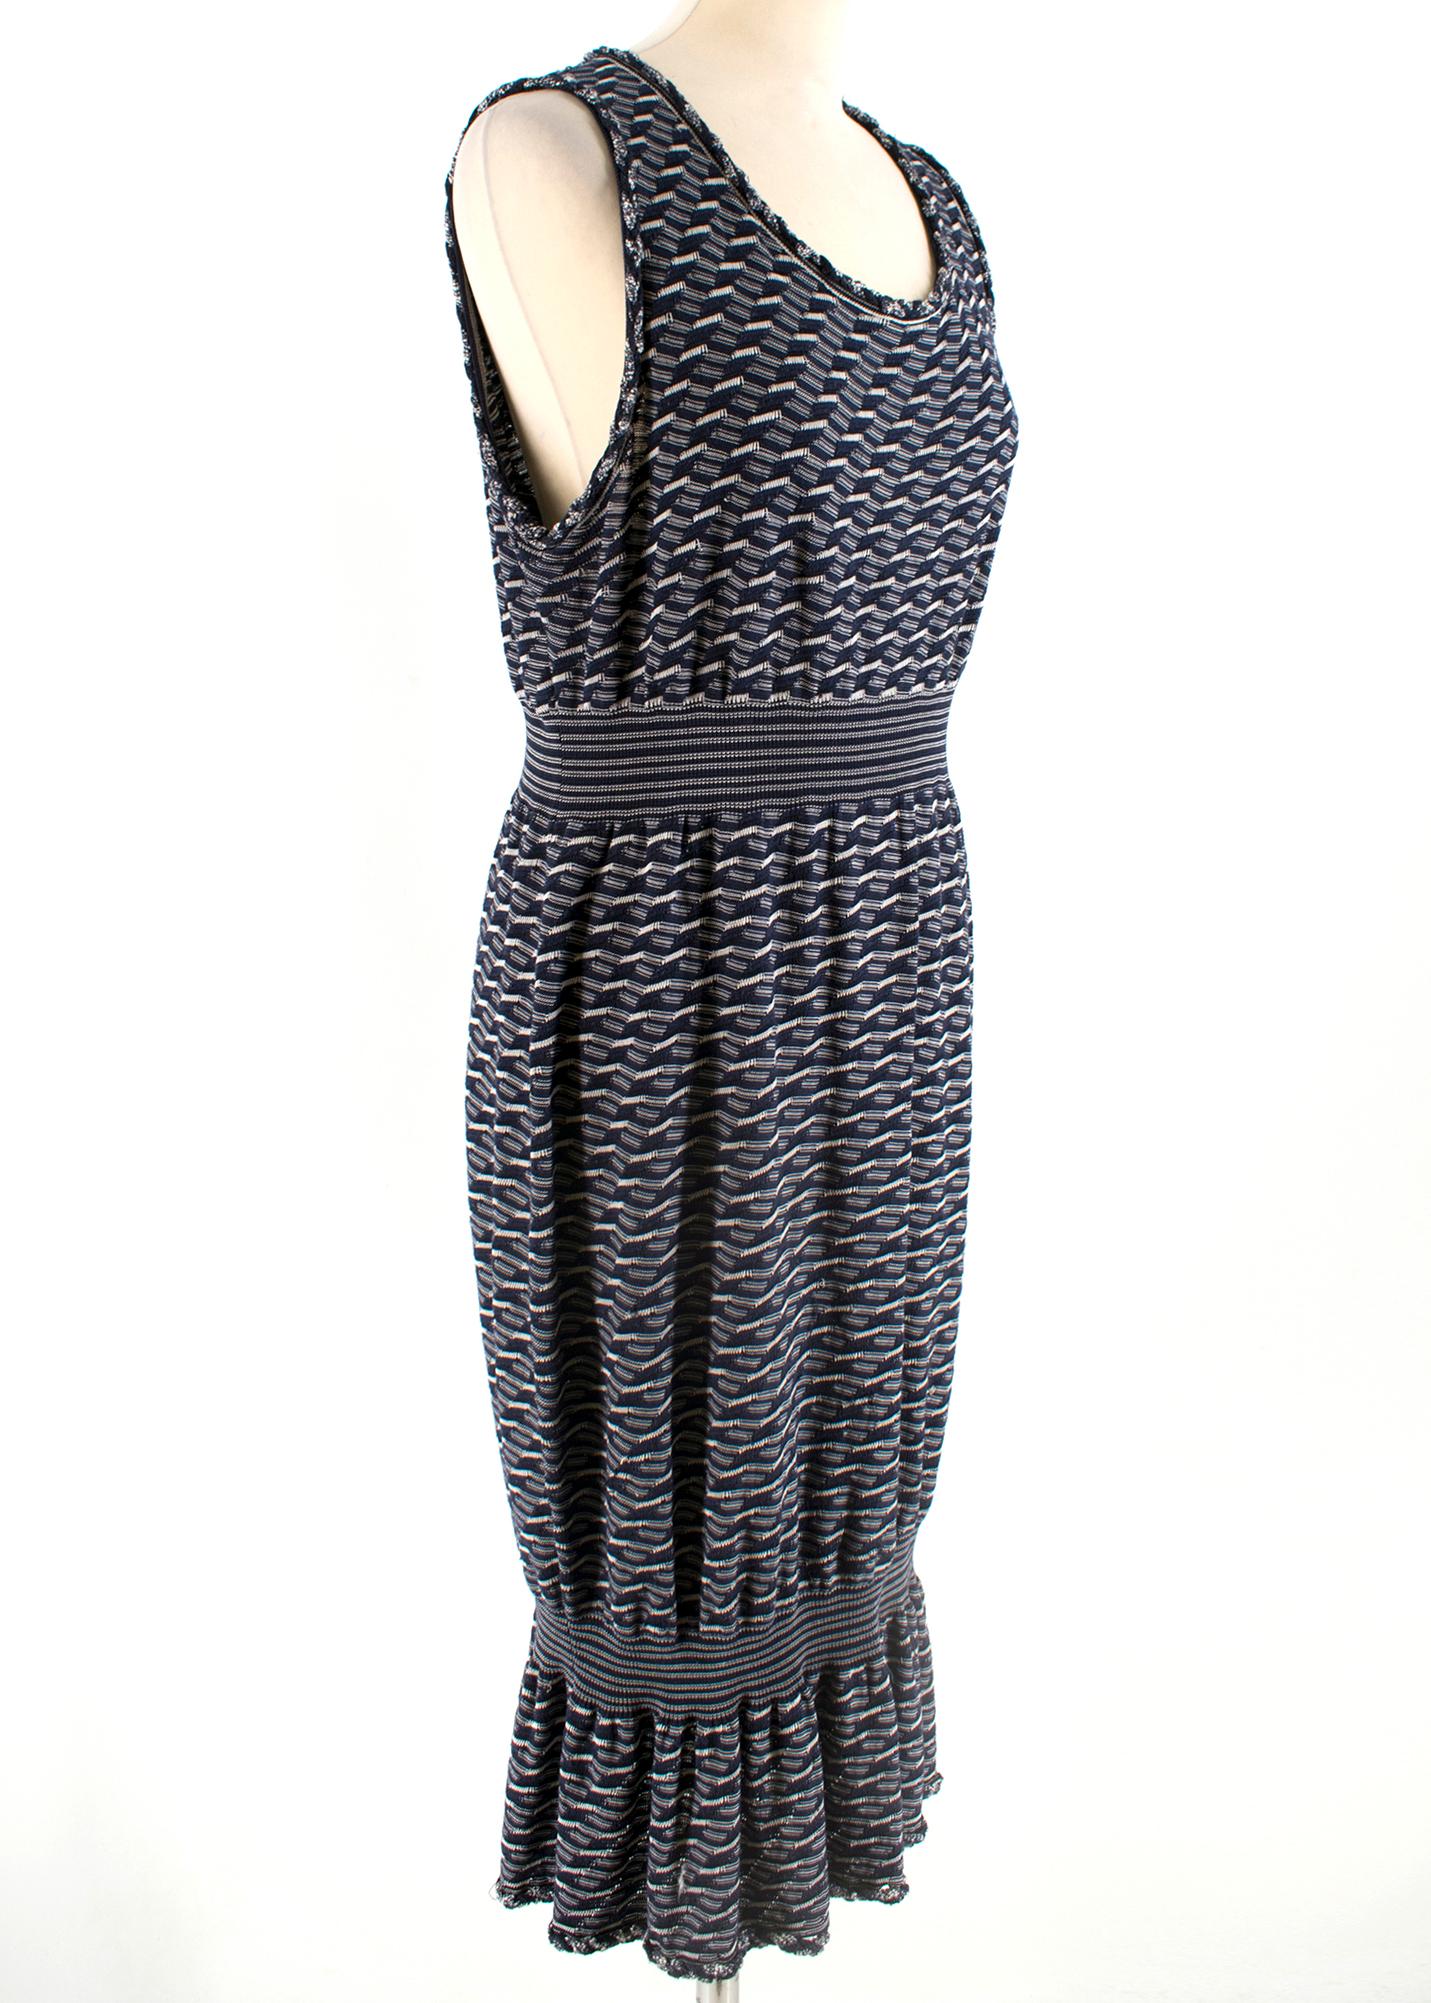 Chanel Navy Knit Sleeveless Dress

- Elastic waist dress and elastic bottom
- Great for the day time

Please note, these items
are pre-owned and may show signs of being stored even when unworn and unused. This is reflected within the significantly